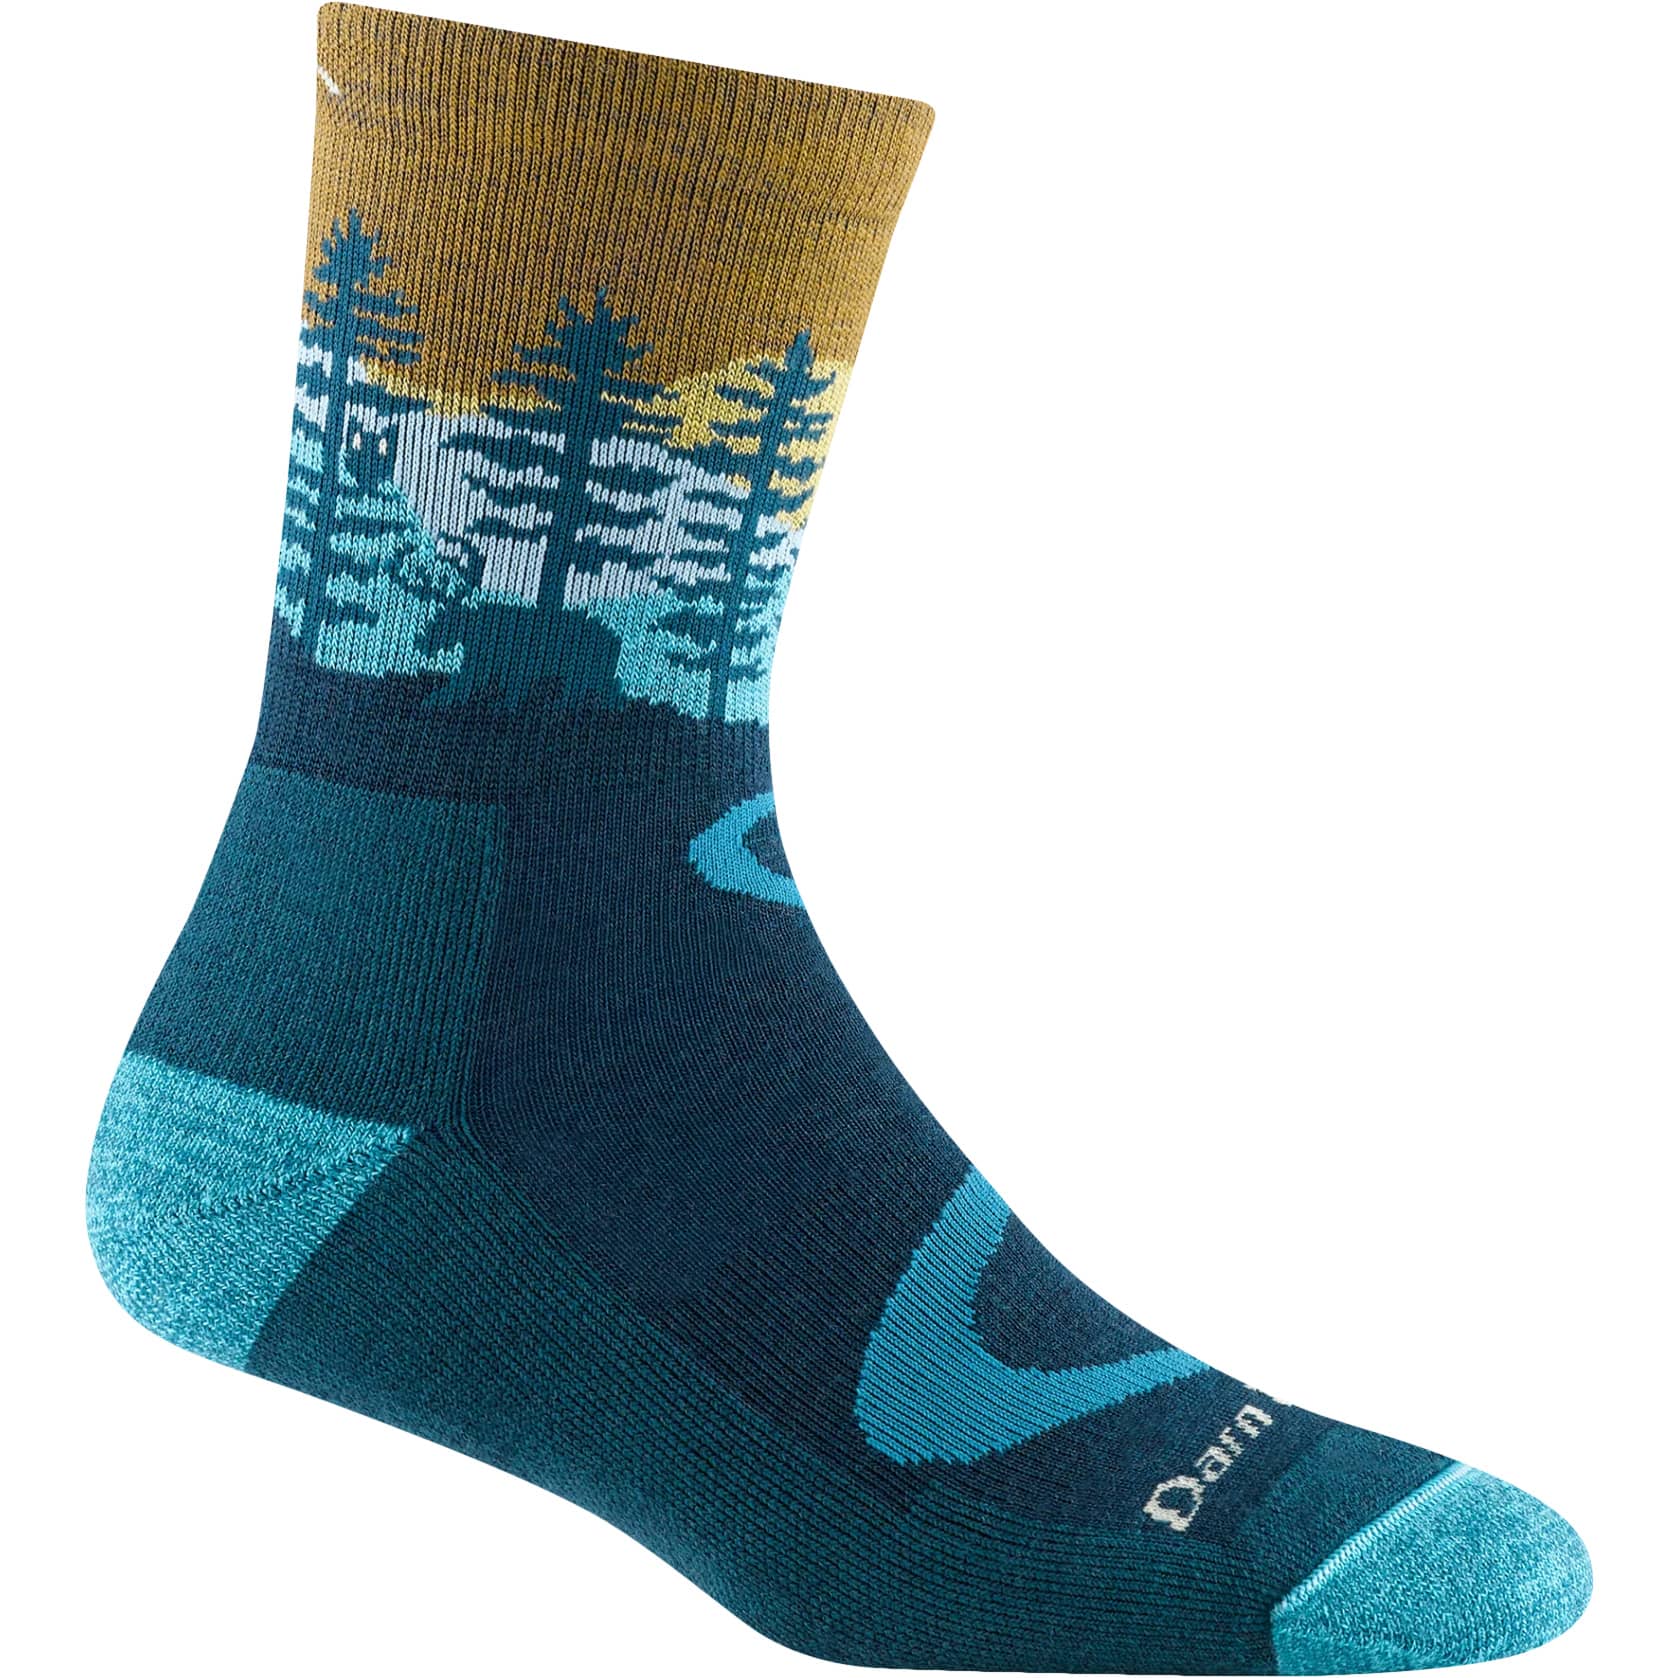 The Darn Tough Quarter Midweight hiking socks review